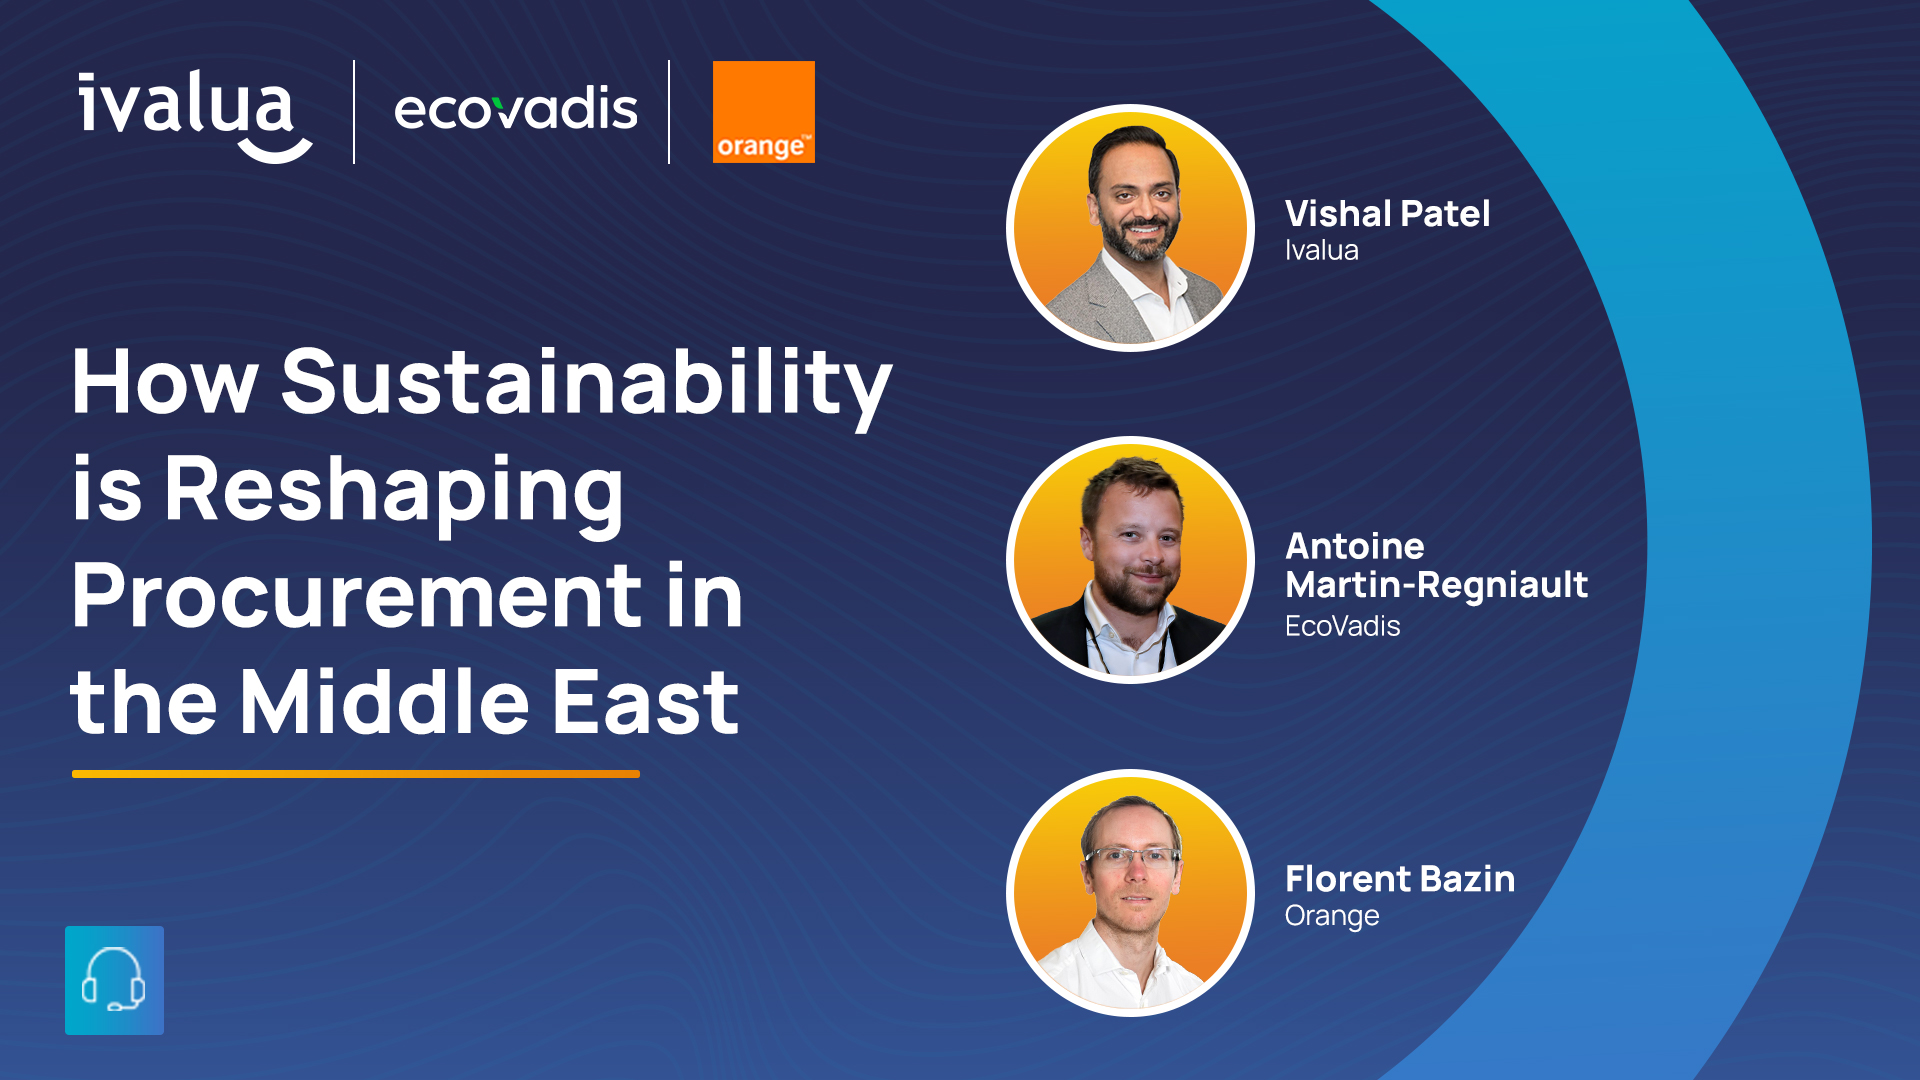 How Sustainability is Reshaping Procurement in the Middle East